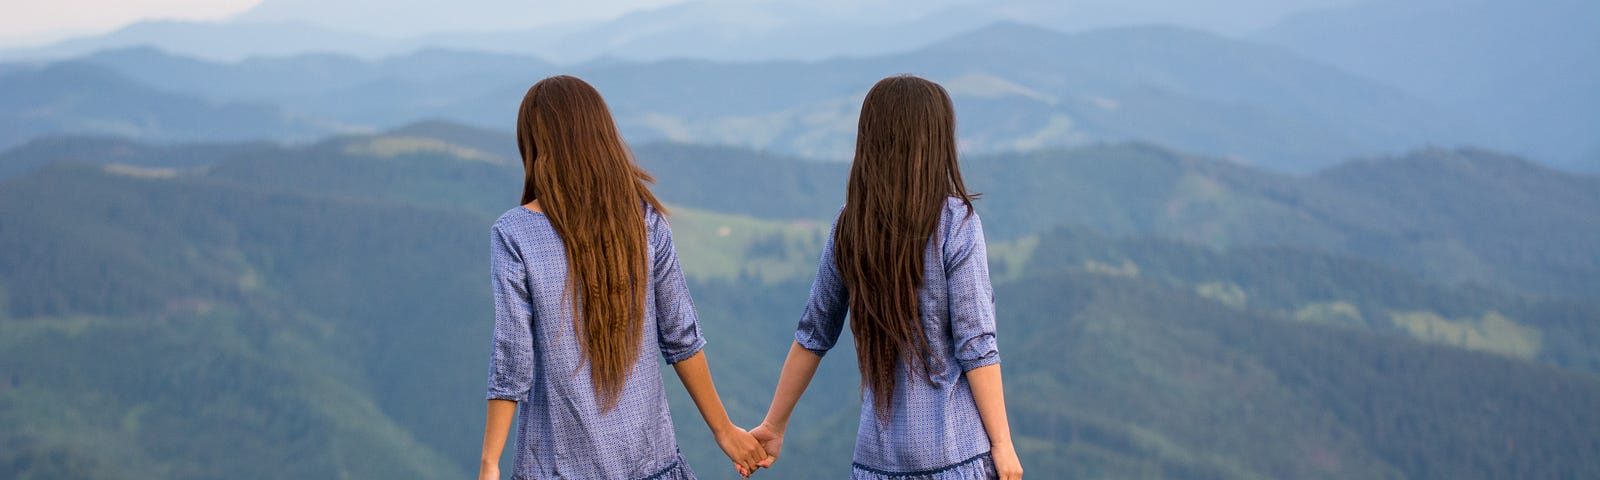 Two women looking over the mountains